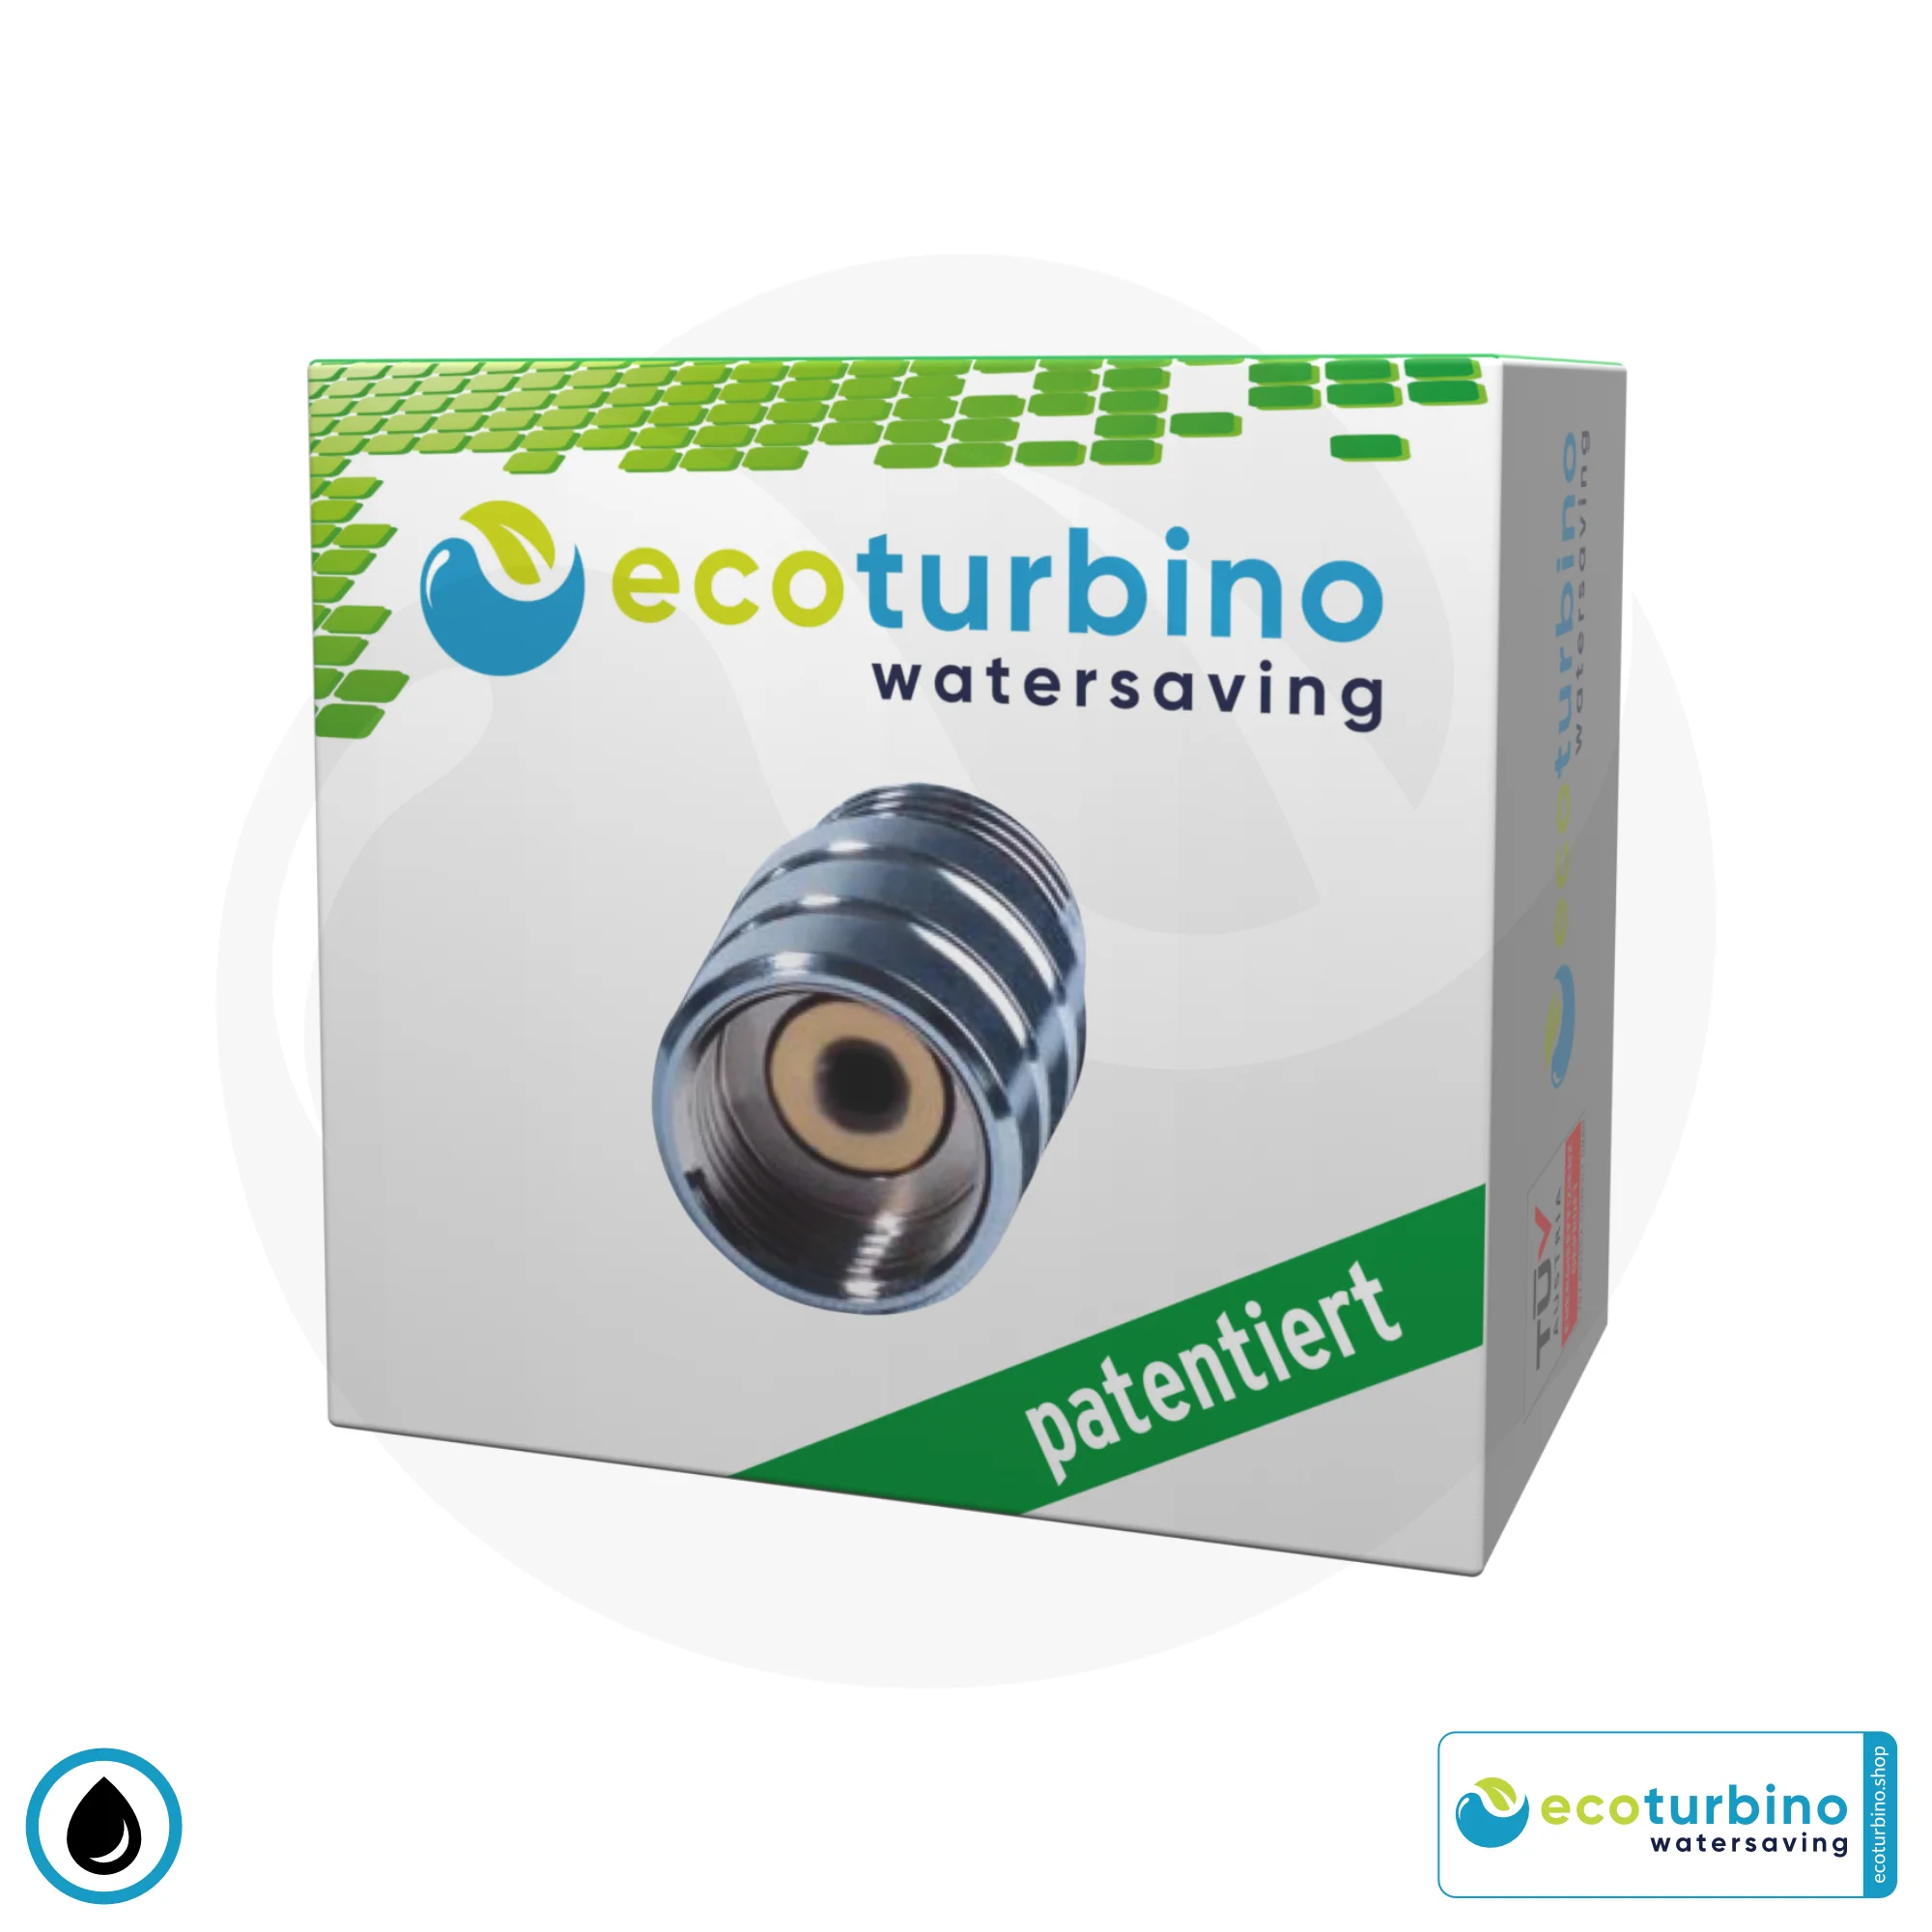 ecoturbino® ET10L Water-Saving Shower Adapter | Save Water and Energy (Gas, Electricity) | Reduce Costs by up to 40% when Showering + Emptying the Shower Head